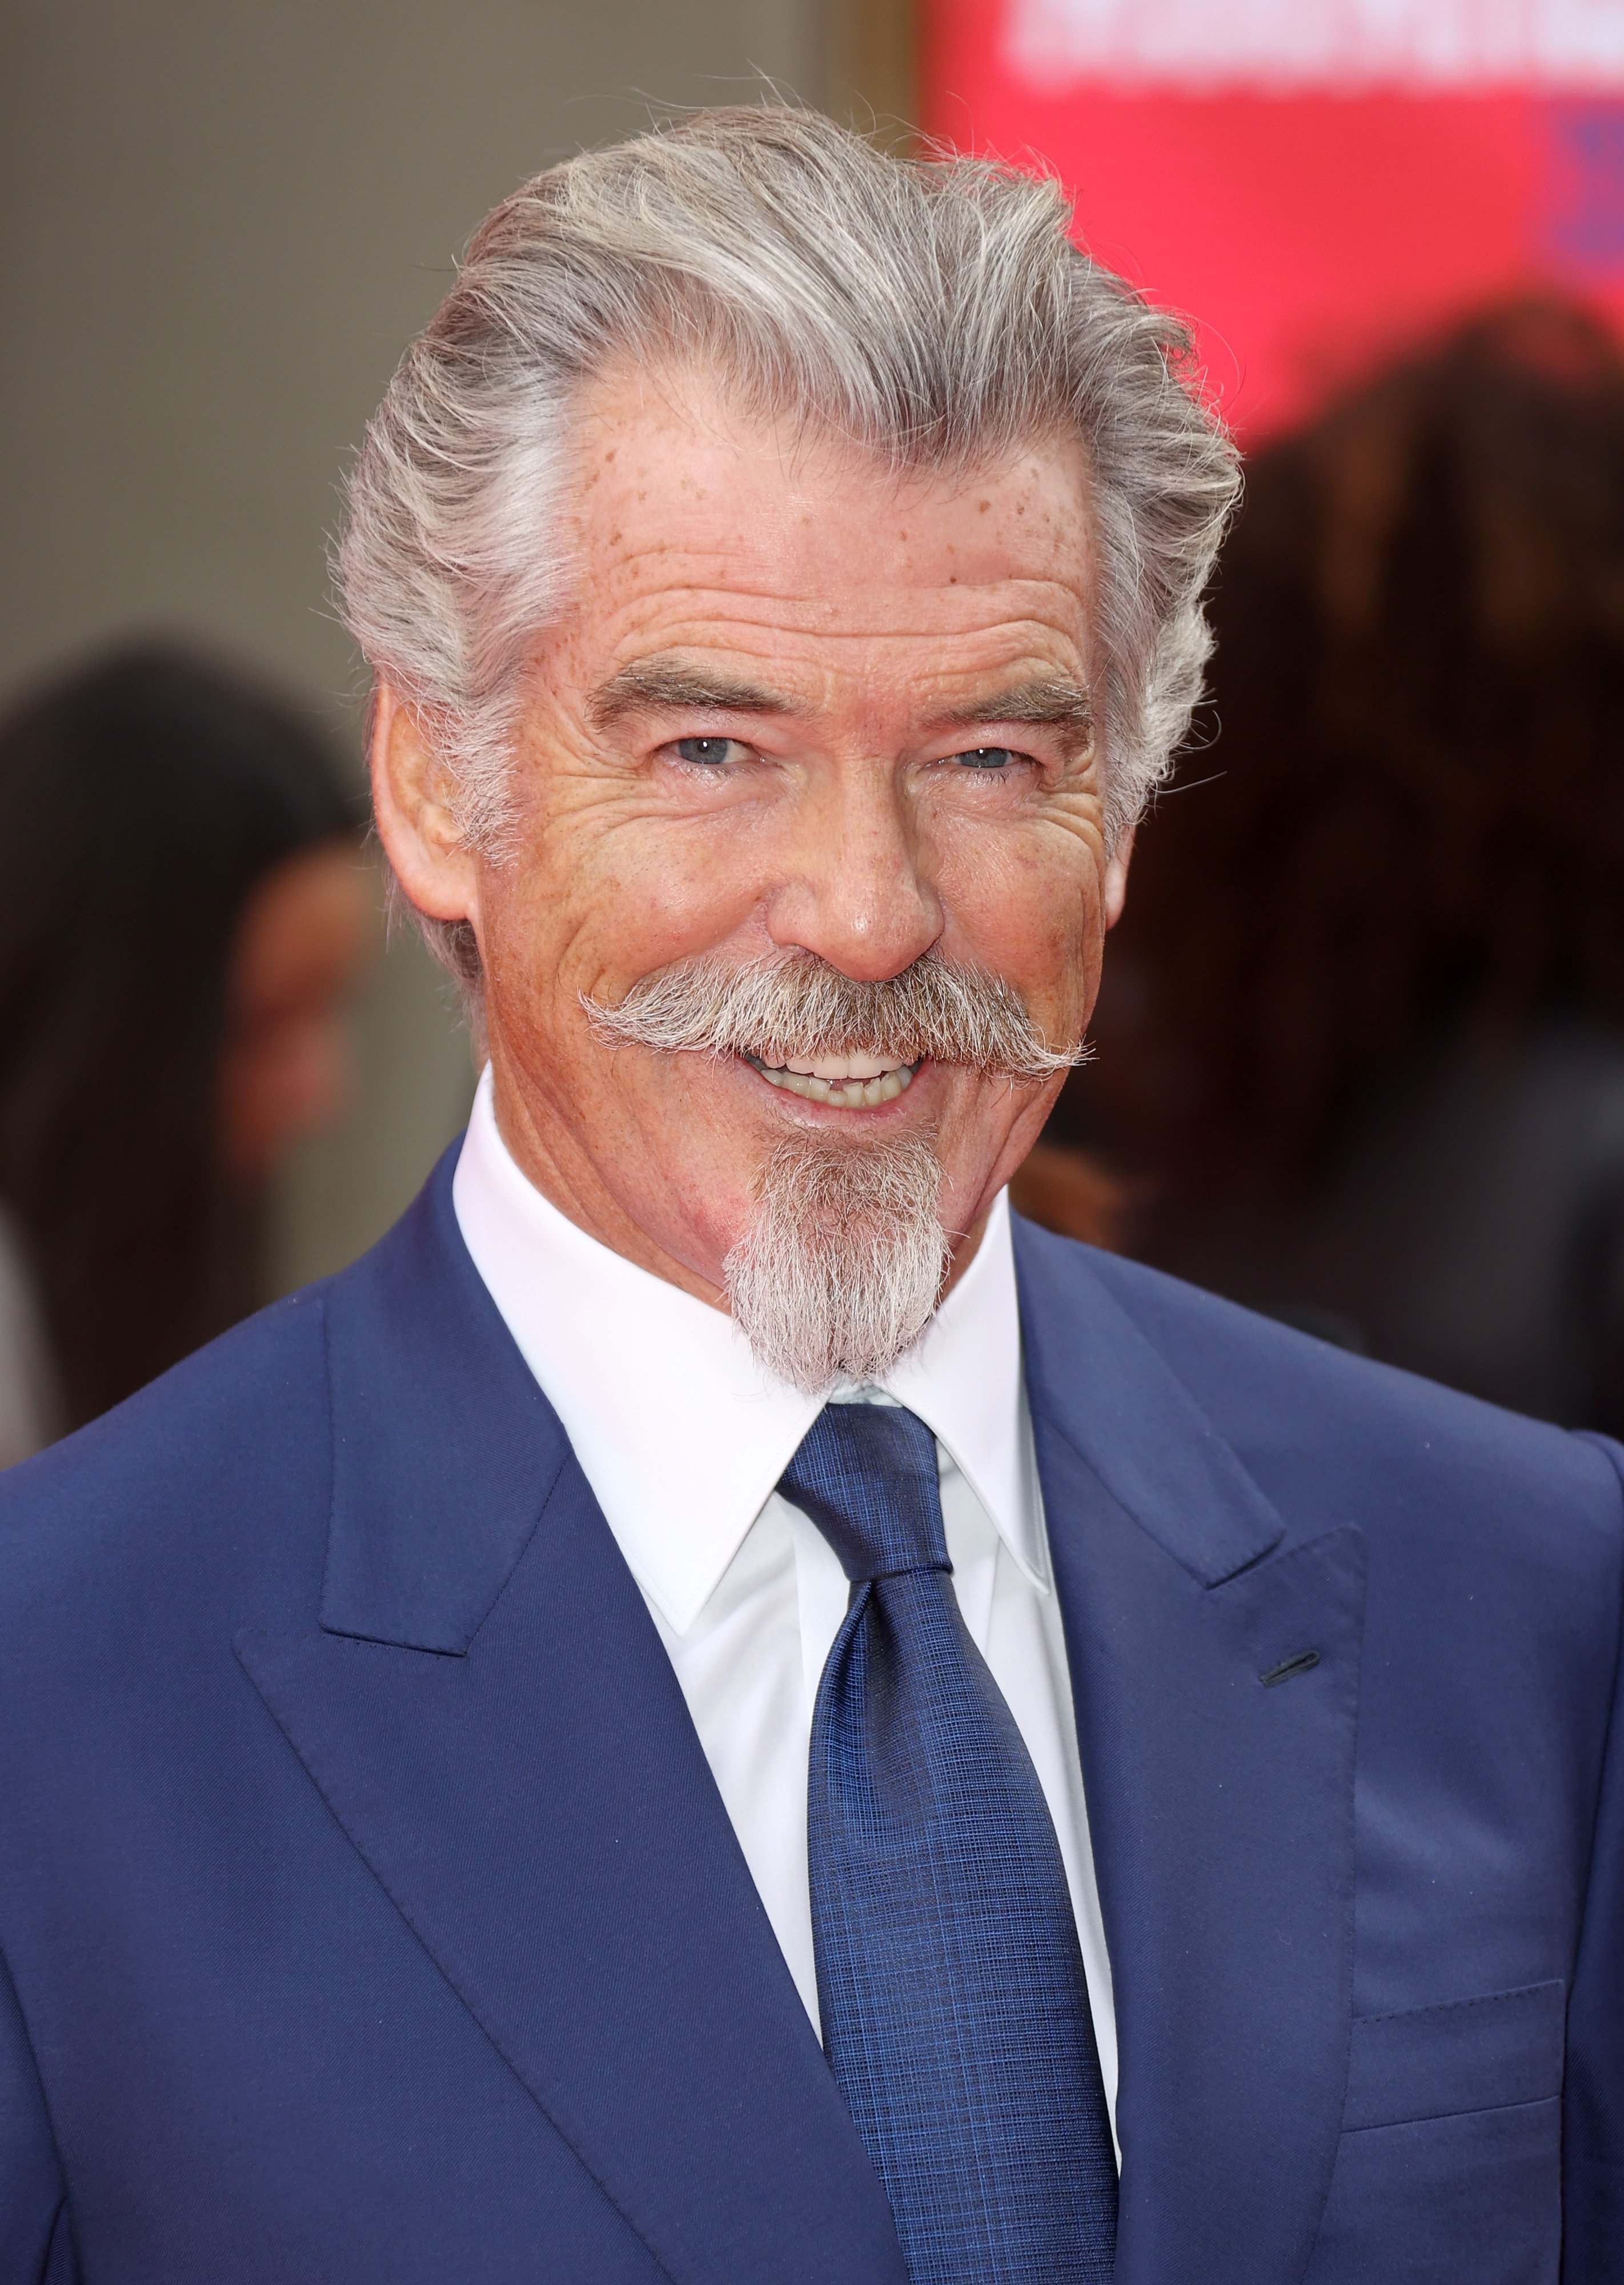 Pierce Brosnan at the Prince's Trust And TK Maxx & Homesense Awards on March 11, 2020, in London | Source: Getty Images